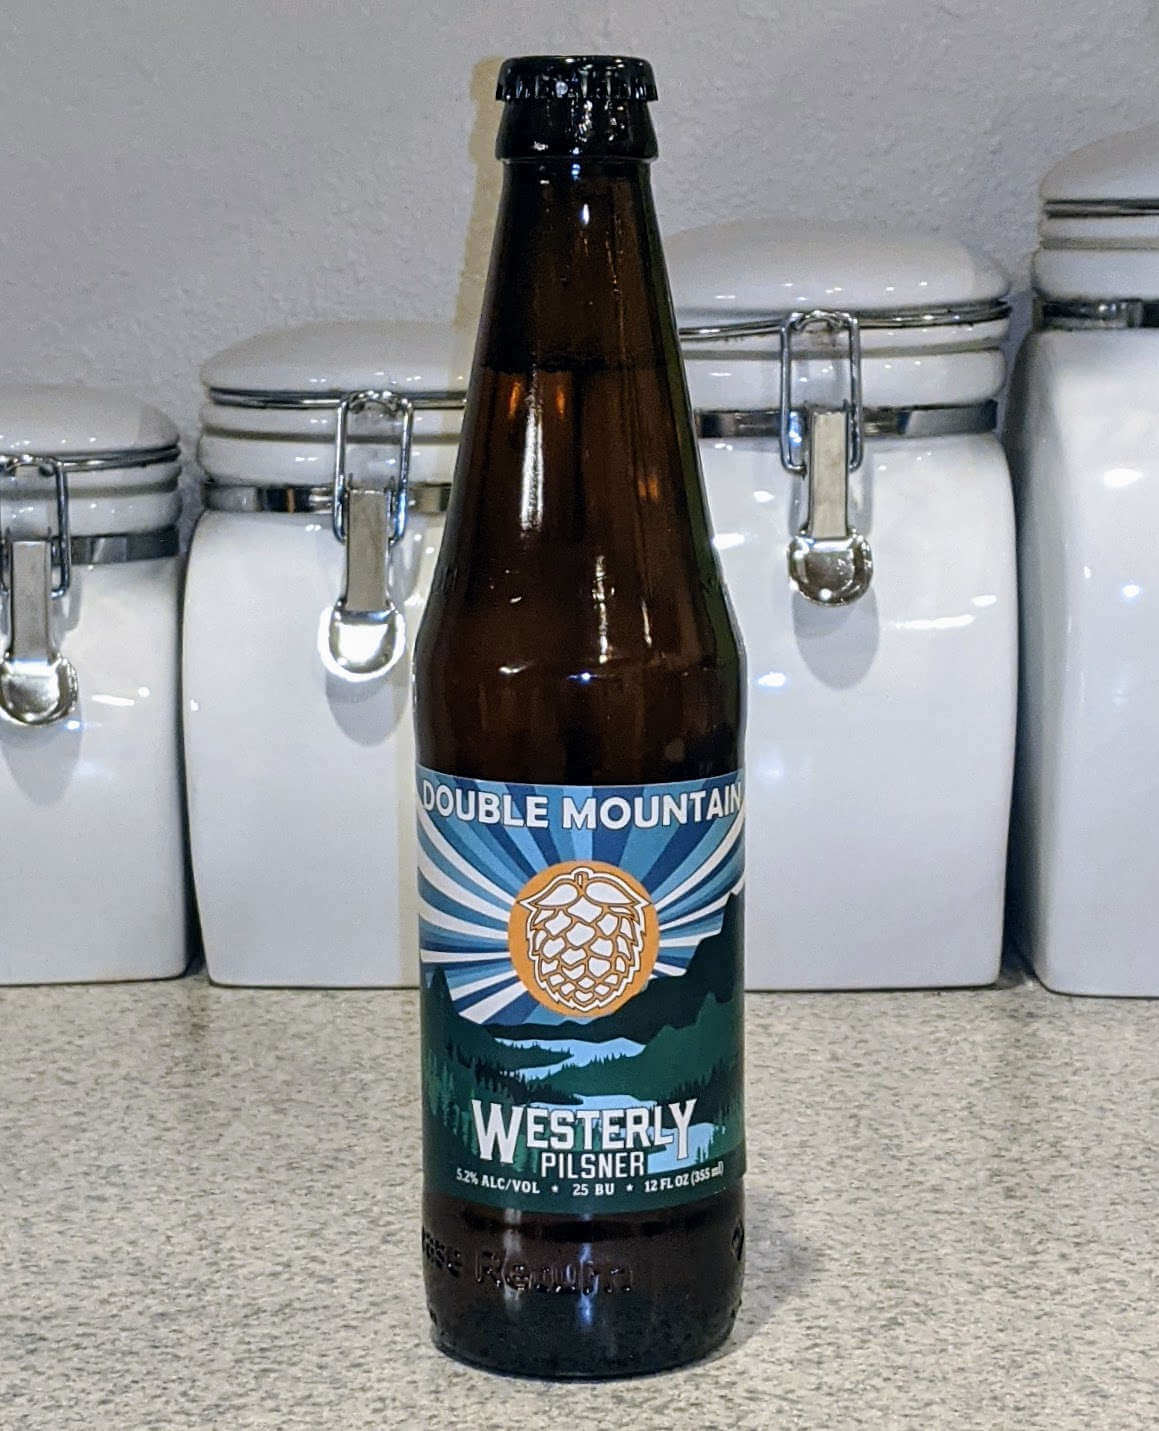 Received: Double Mountain Westerly Pilsner